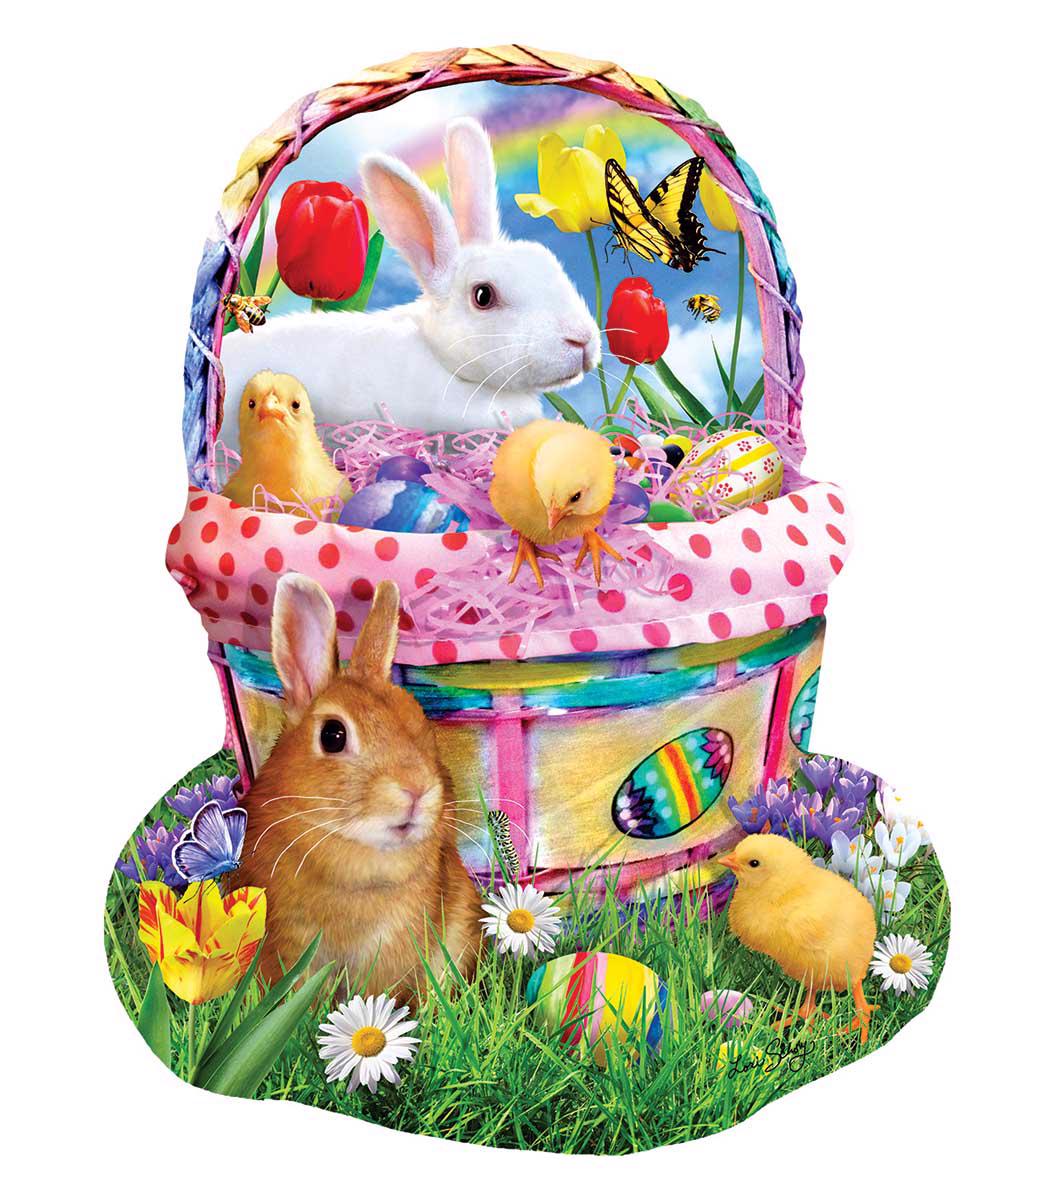 Puzzle Lori Schory - Bunny's Easter Basket